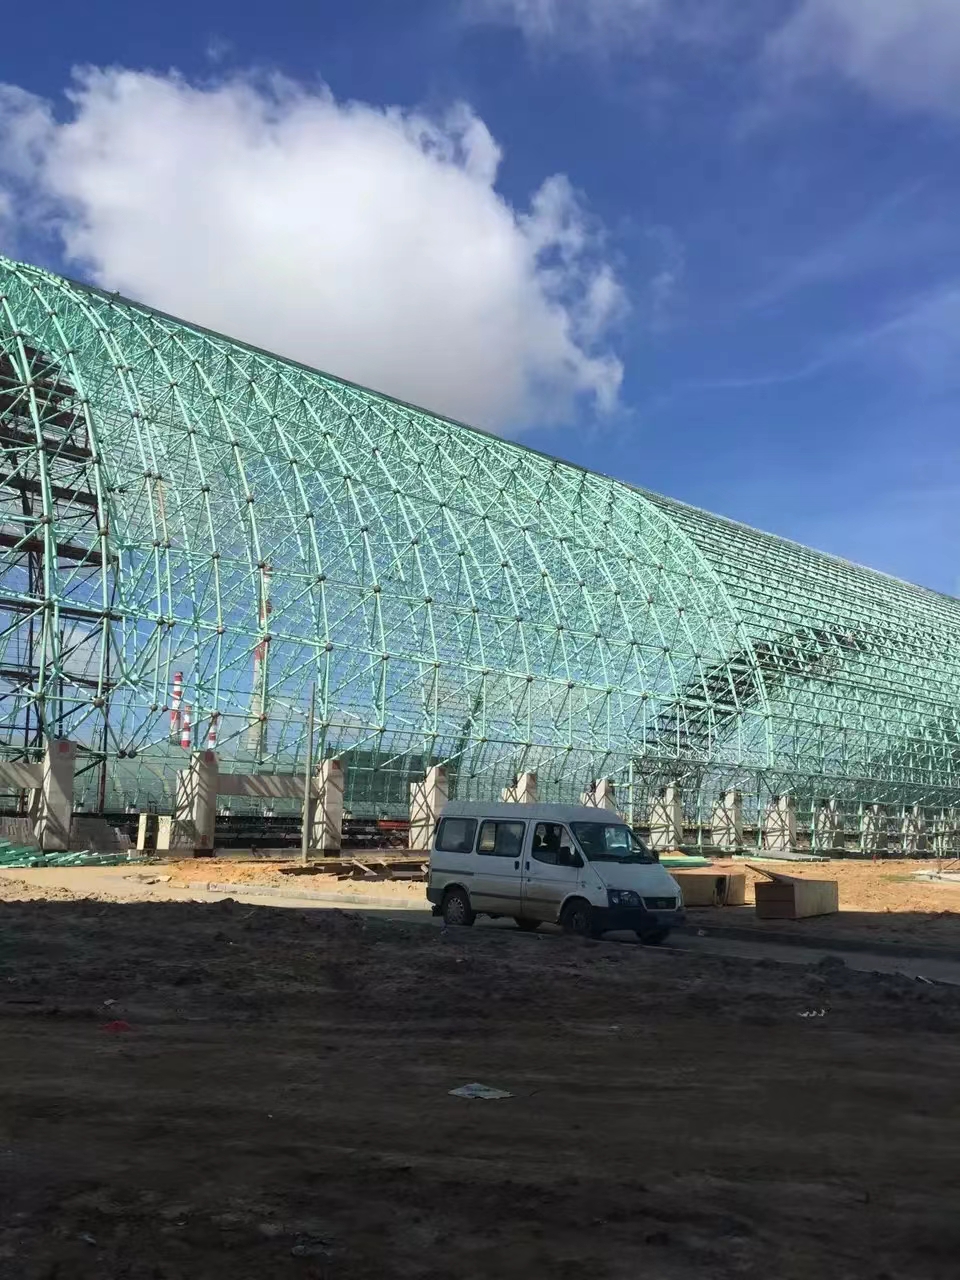 Space frame is also known as the grid frame in China